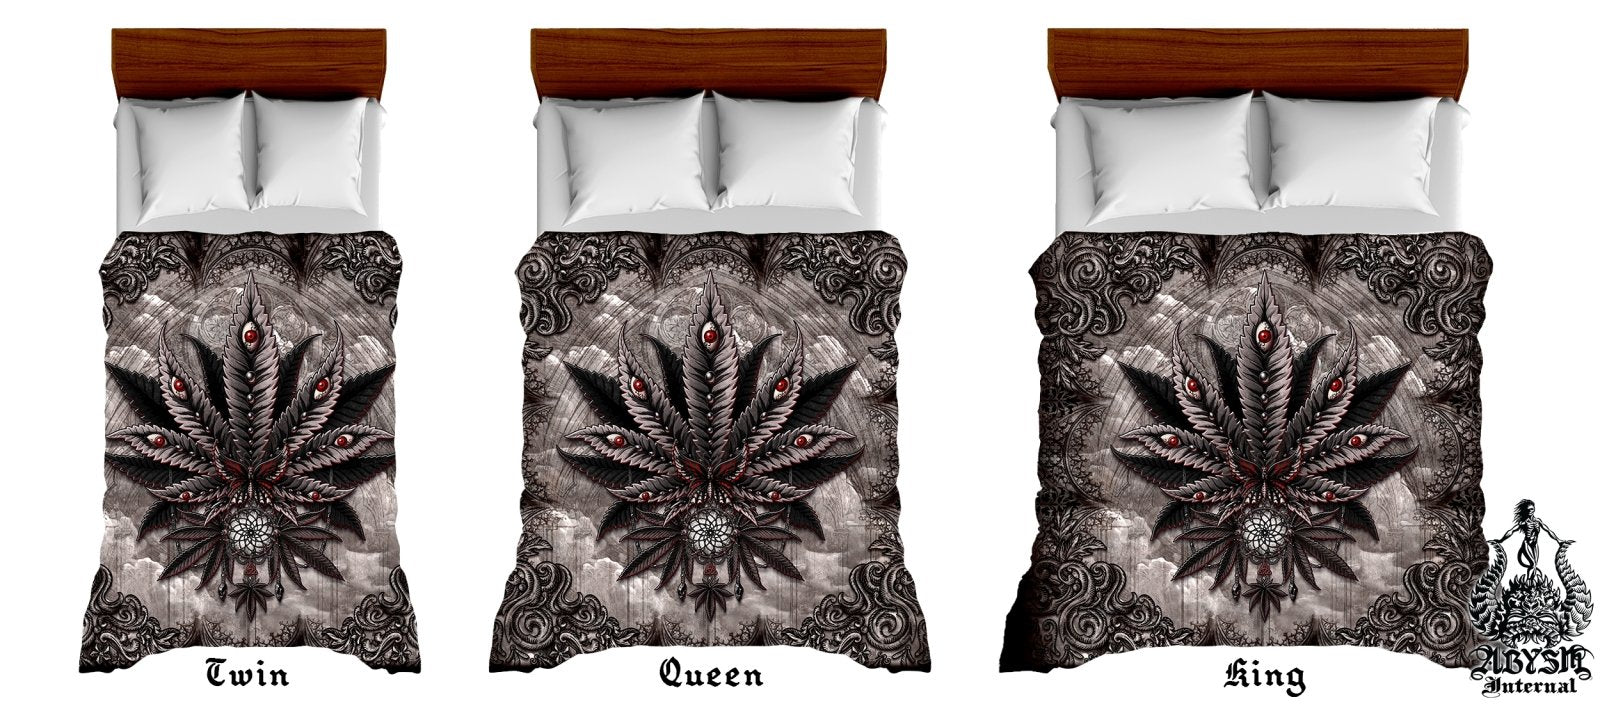 Gothic Weed Bedding Set, Comforter and Duvet, Cannabis Bed Cover, Marijuana Bedroom Decor, King, Queen and Twin Size, 420 Room Art - Horror Grey - Abysm Internal